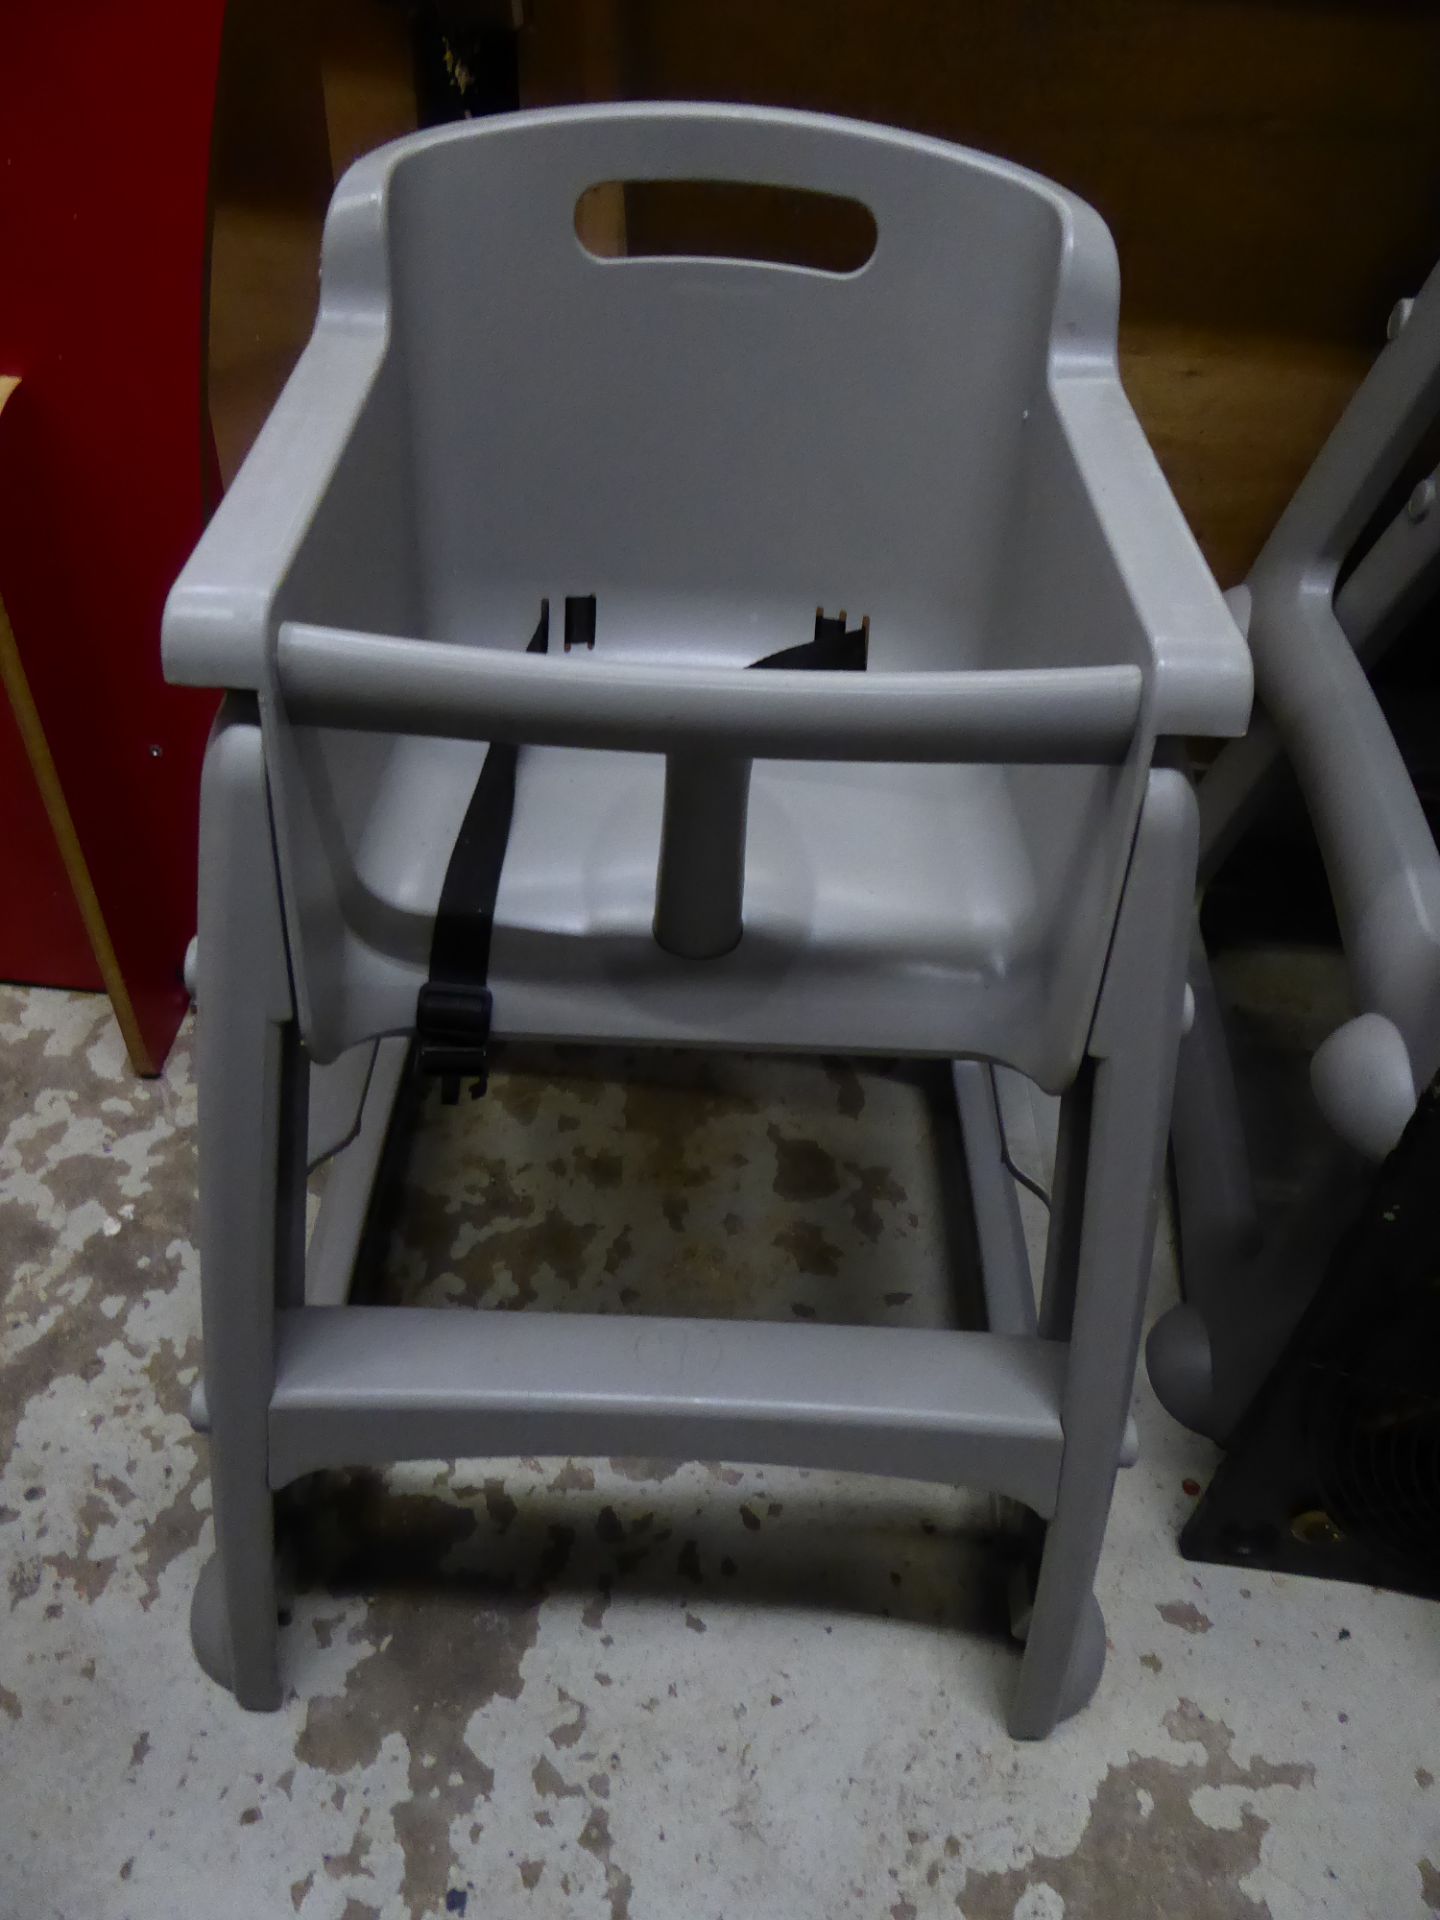 *3 x gray plastic toddler sized high chairs